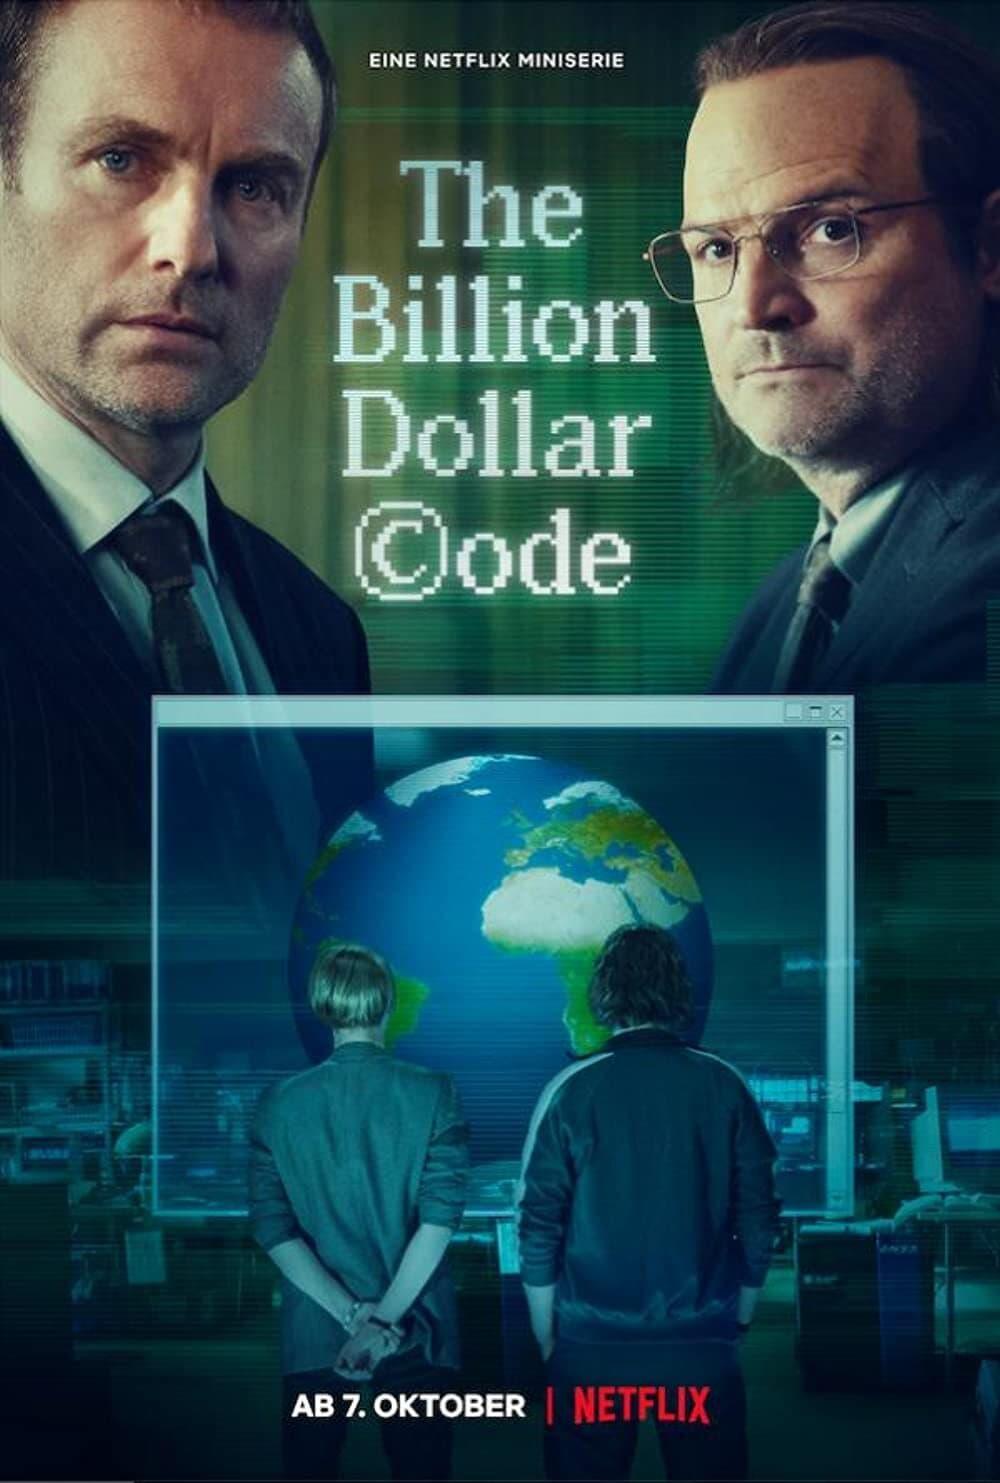 TV ratings for The Billion Dollar Code in South Africa. Netflix TV series